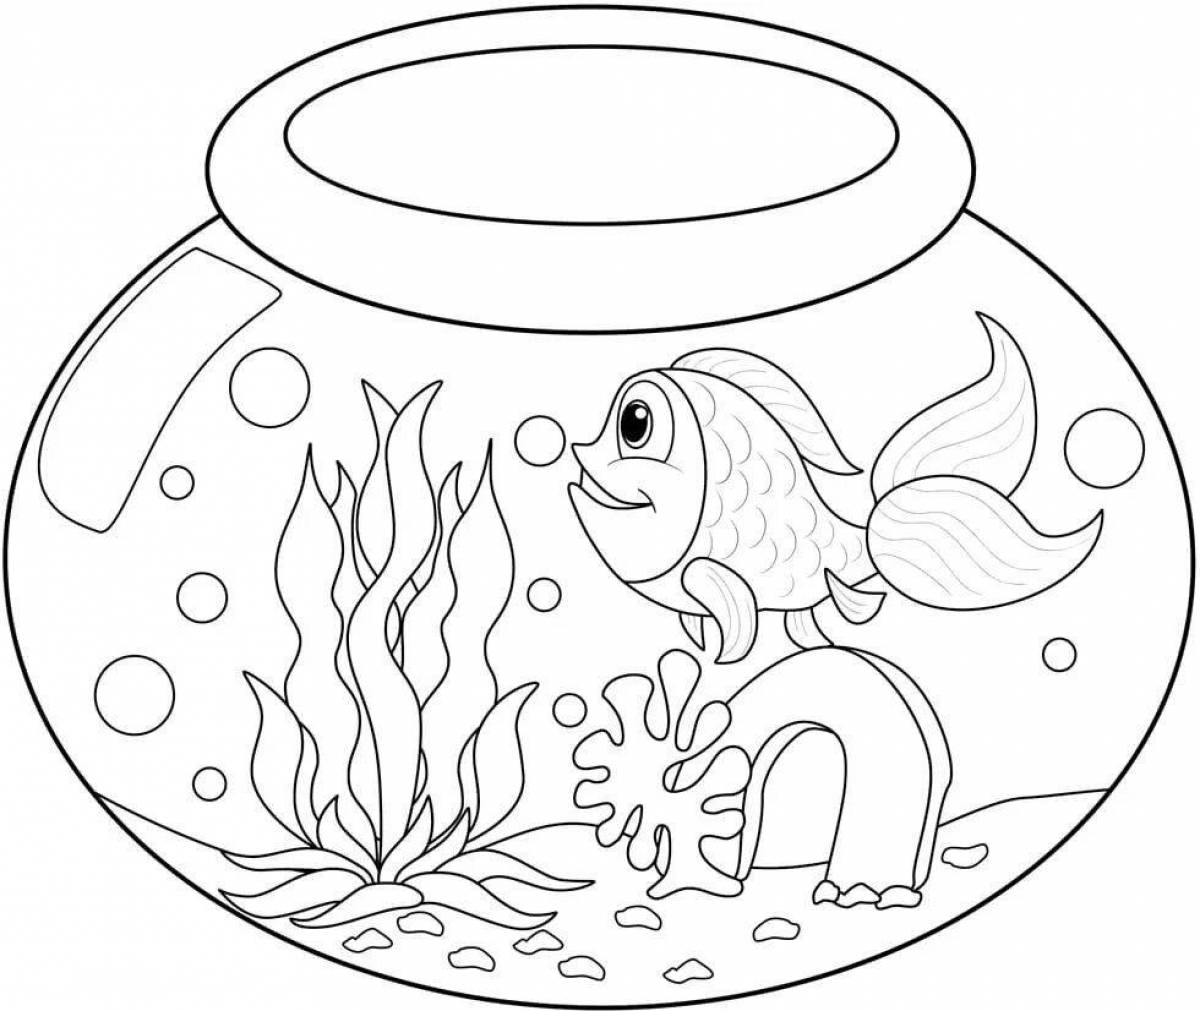 Live aquarium coloring book for 3-4 year olds